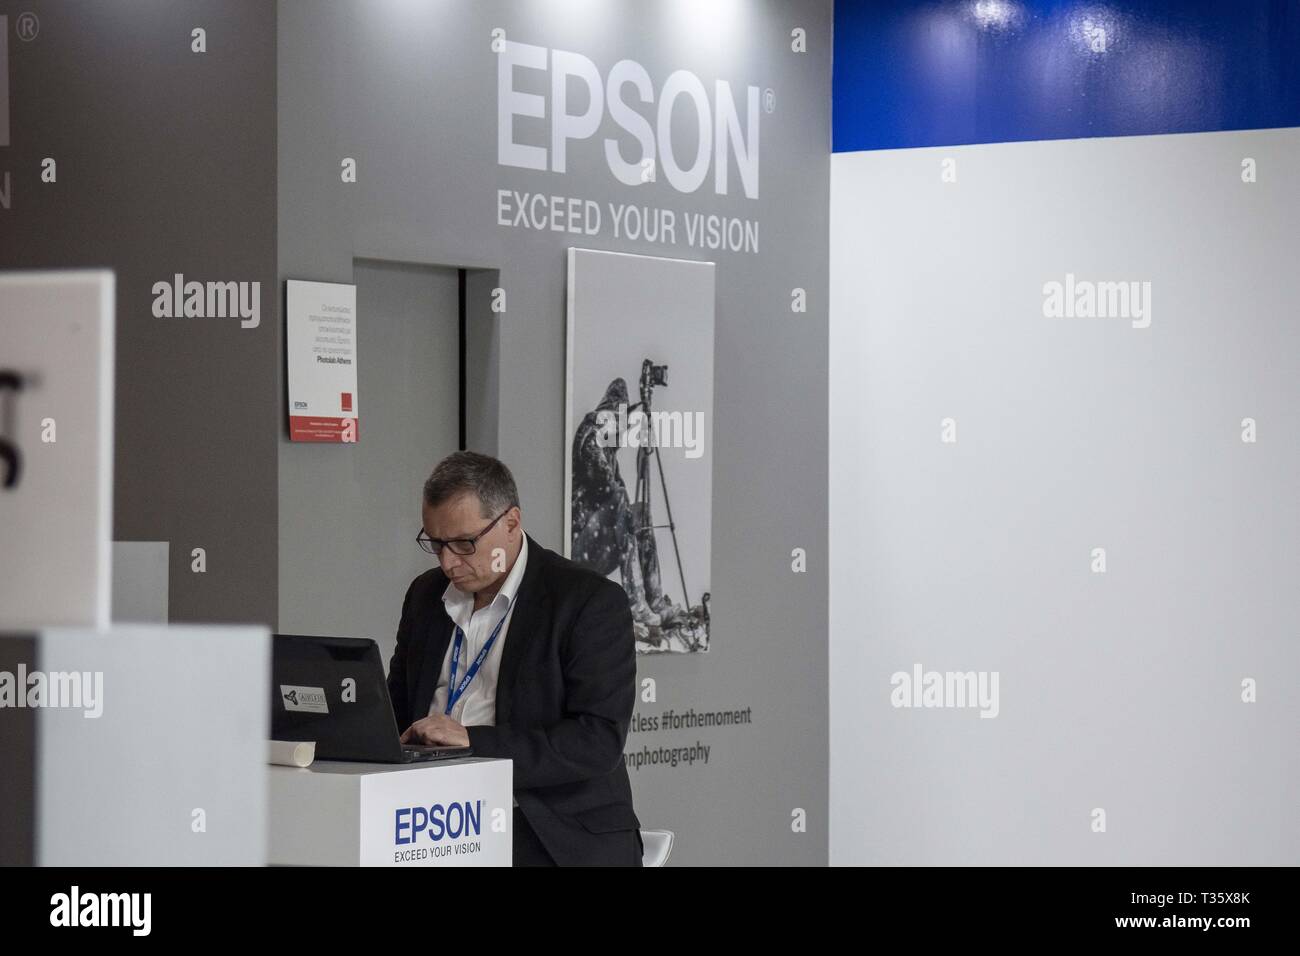 A man seen looking at his laptop in front of the Epson store during the festival. Image +Tech & Photo vision 2019 is a big festival with large corporate delegations, many exhibitions, stores and workshops about photography and video was held In the place of Helexpo Marousi in Athens, Greece. Stock Photo